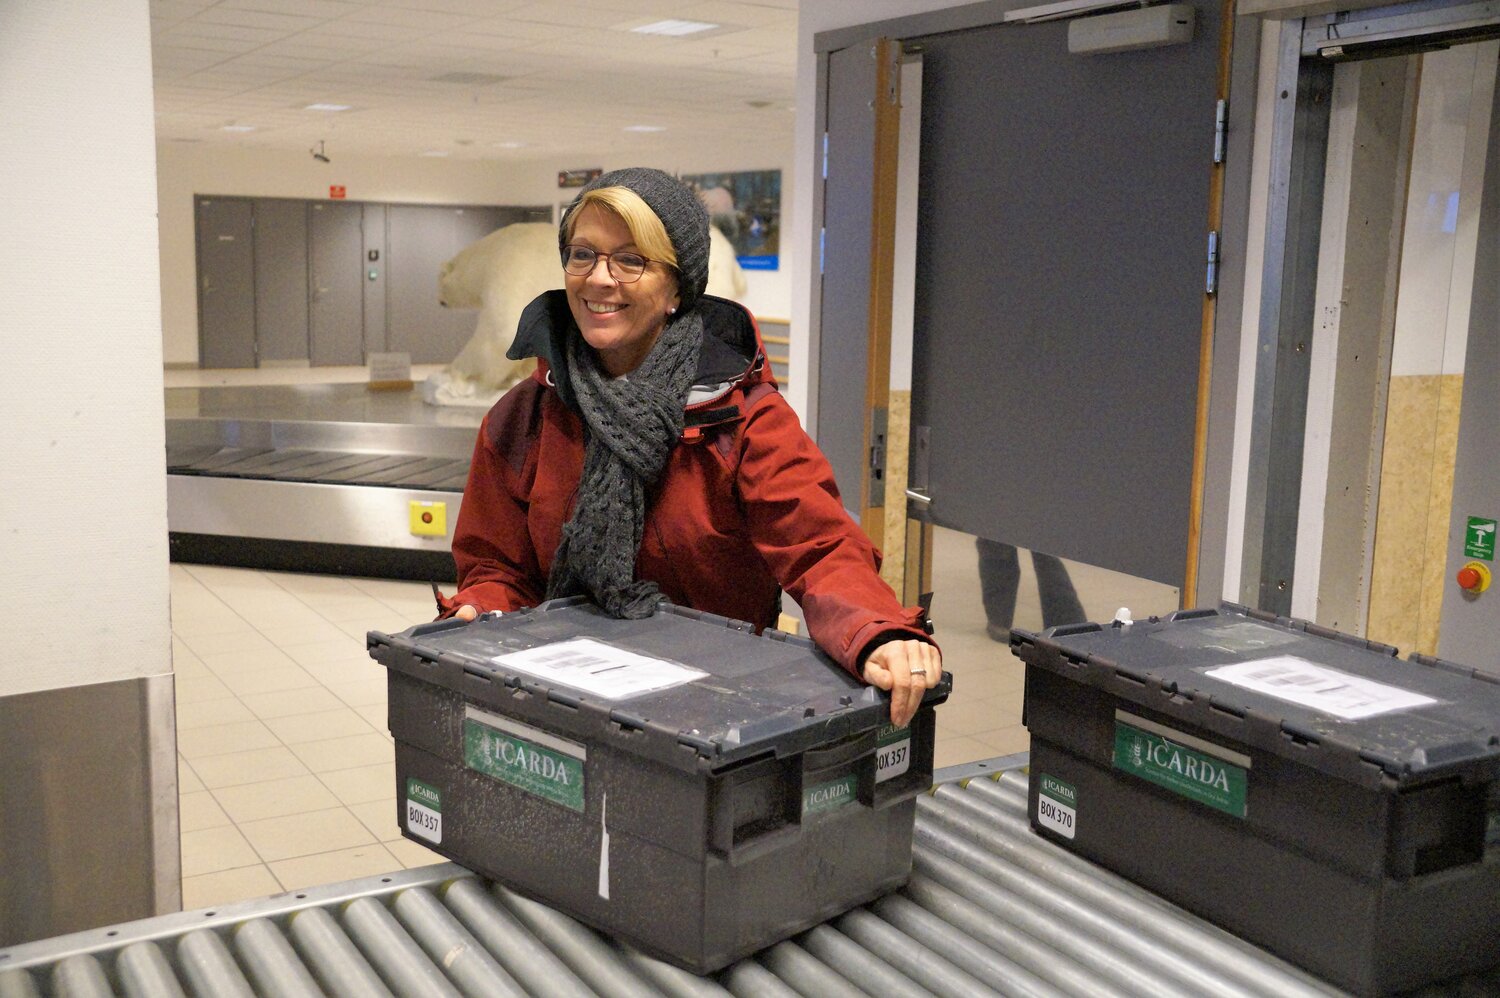 Marie Haga, Crop Trust Executive Director scans boxes of ICARDA's seeds at the Longyearbyen airport, returning to Svalbard after being retrieved from the vault in 2015. Photo: Andrea Gros, ICARDA